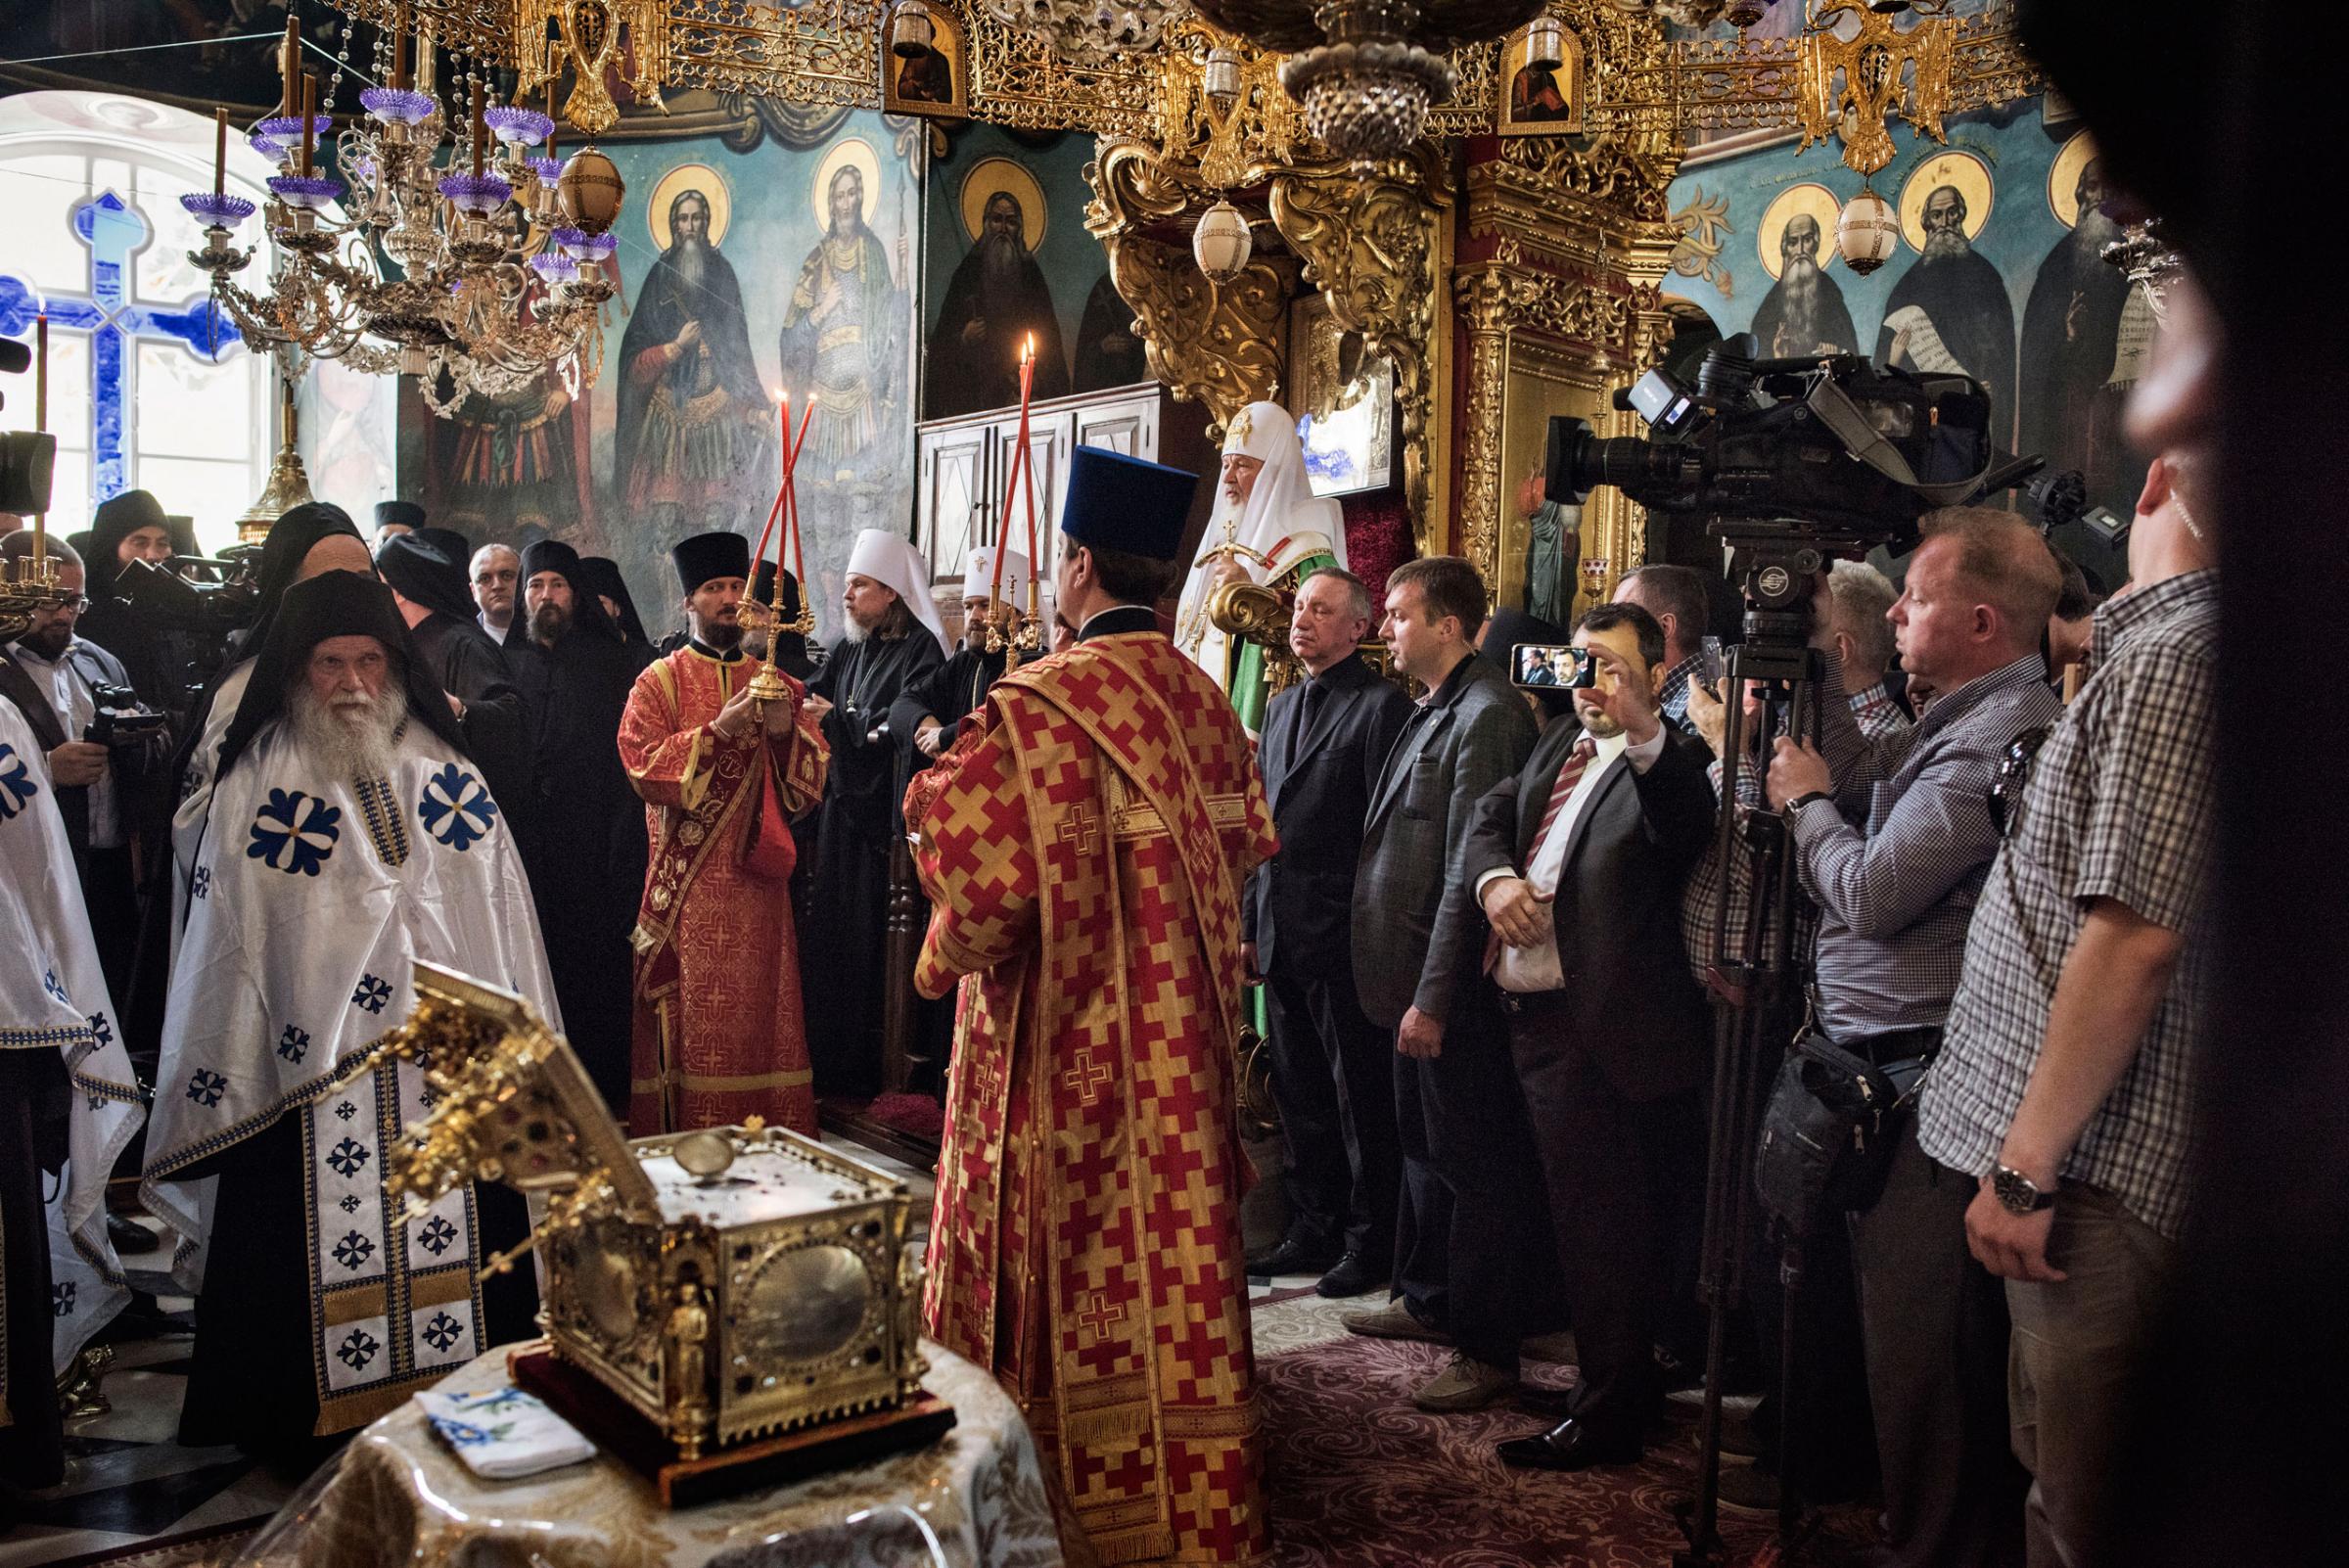 Patriarch Kirill (seated), the head of the Russian Orthodox Church, takes part in a prayer service at the Monastery of St. Panteleimon on Mount Athos, in northern Greece, May 27, 2016. Out of the 20 monasteries that comprise and govern the monastic community of Mount Athos, St. Panteleimon is the only one associated with the Russian Orthodox Church.